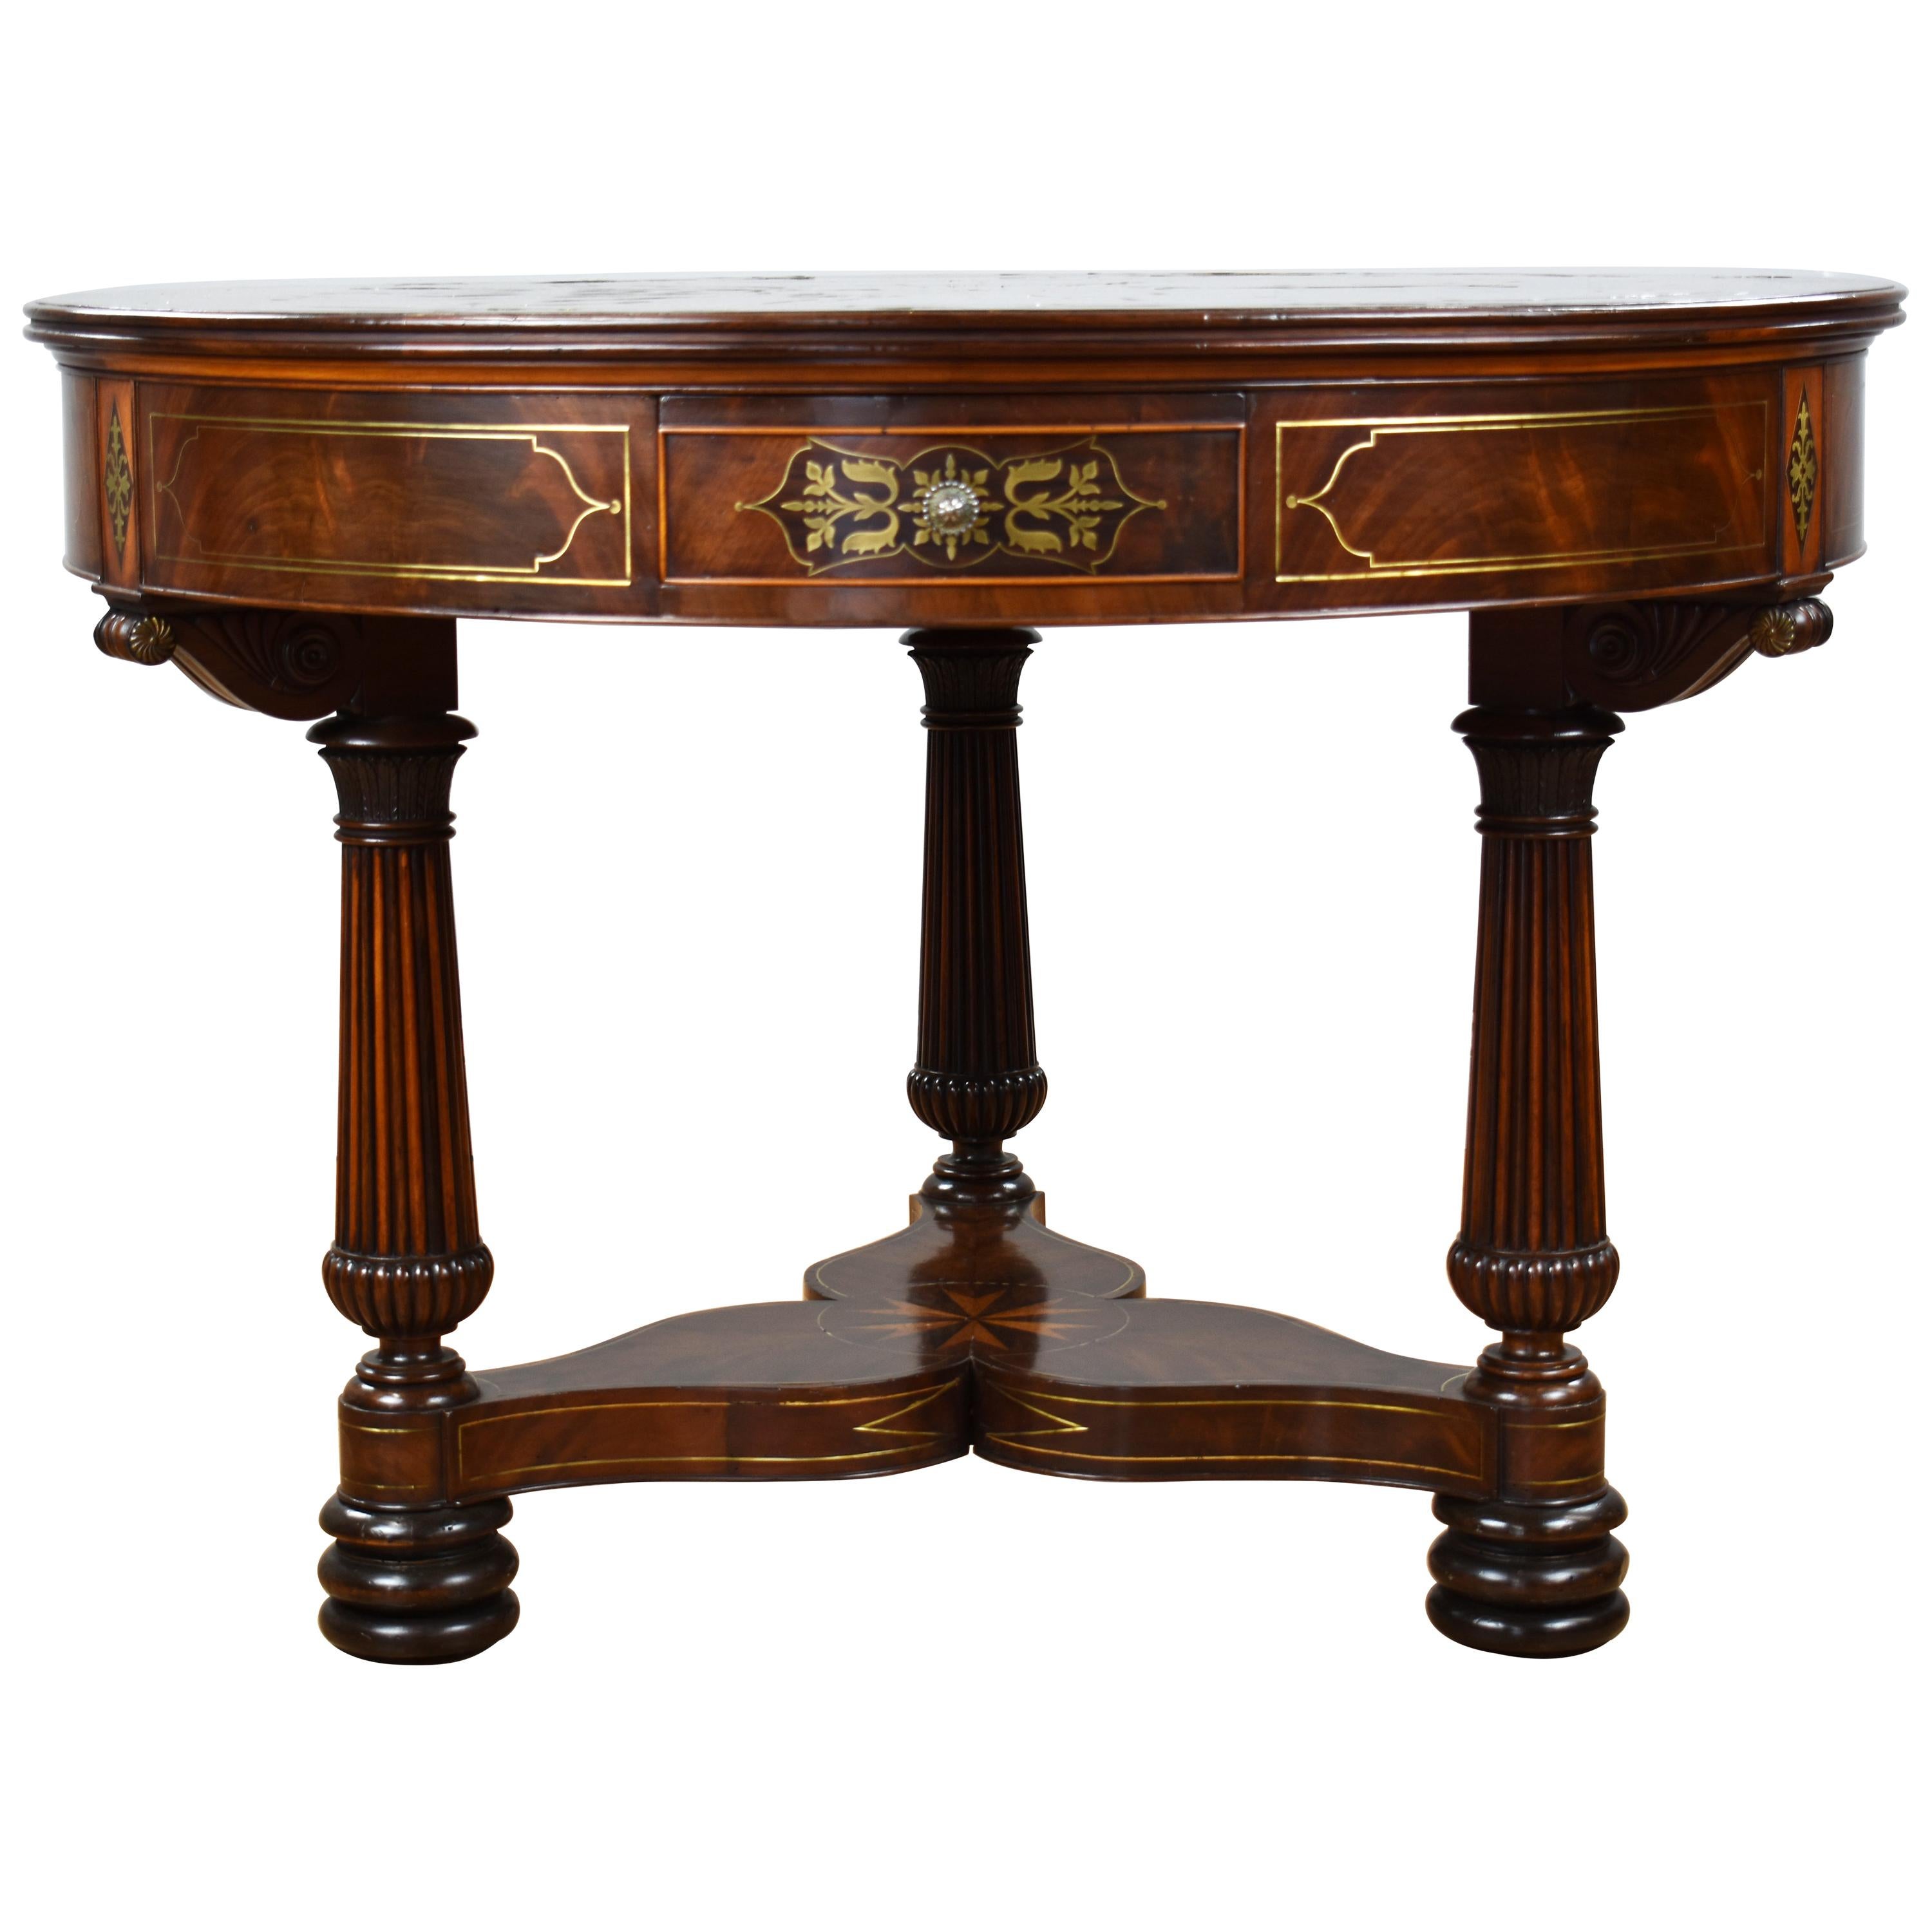 19th Century English Regency Flame Mahogany Brass Inlaid Drum Table For Sale